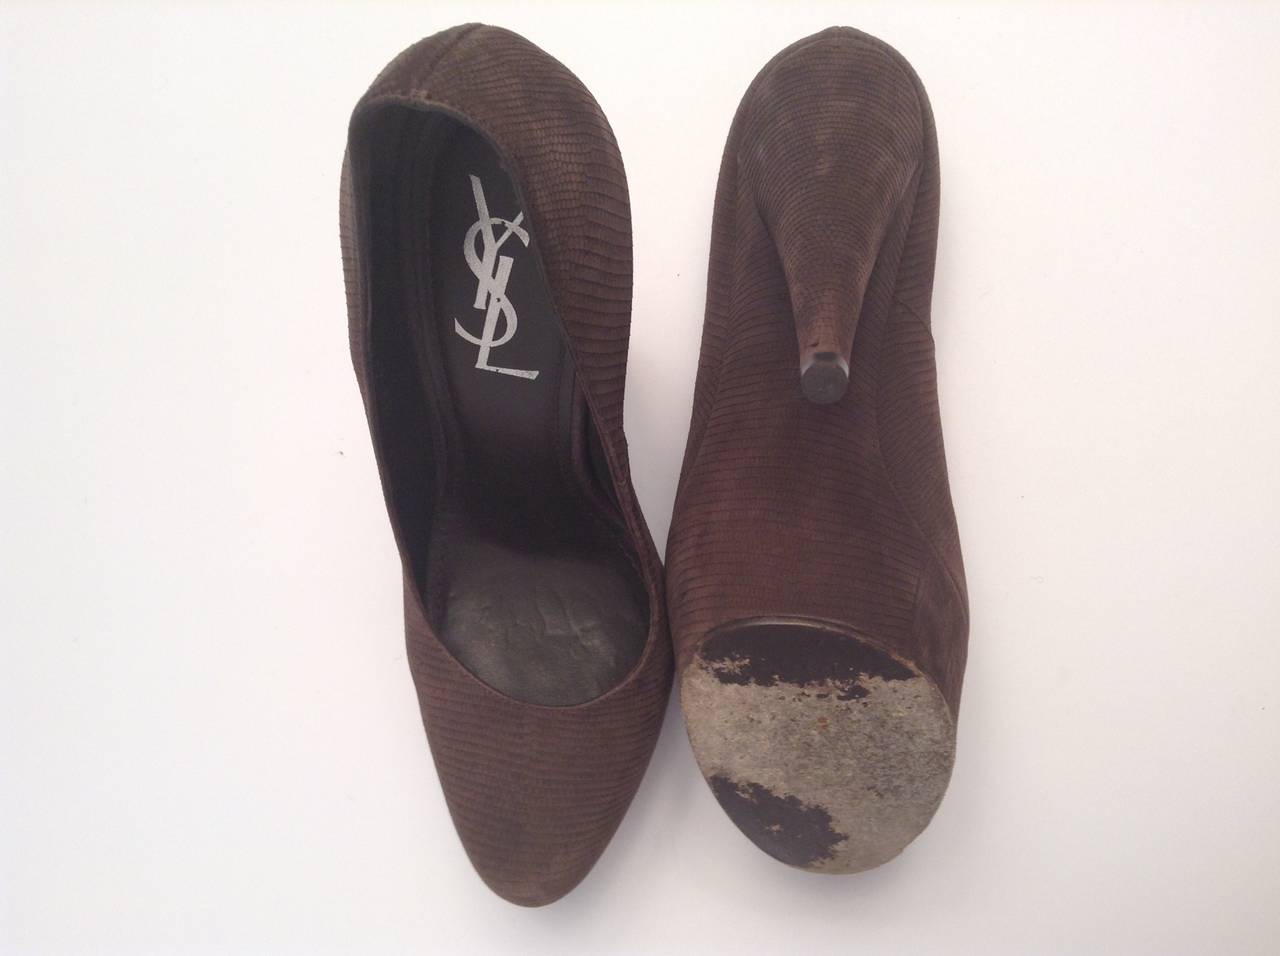 Yves Saint Laurent Brown Suede Platform Pumps Size 38.5 In Excellent Condition For Sale In Toronto, Ontario